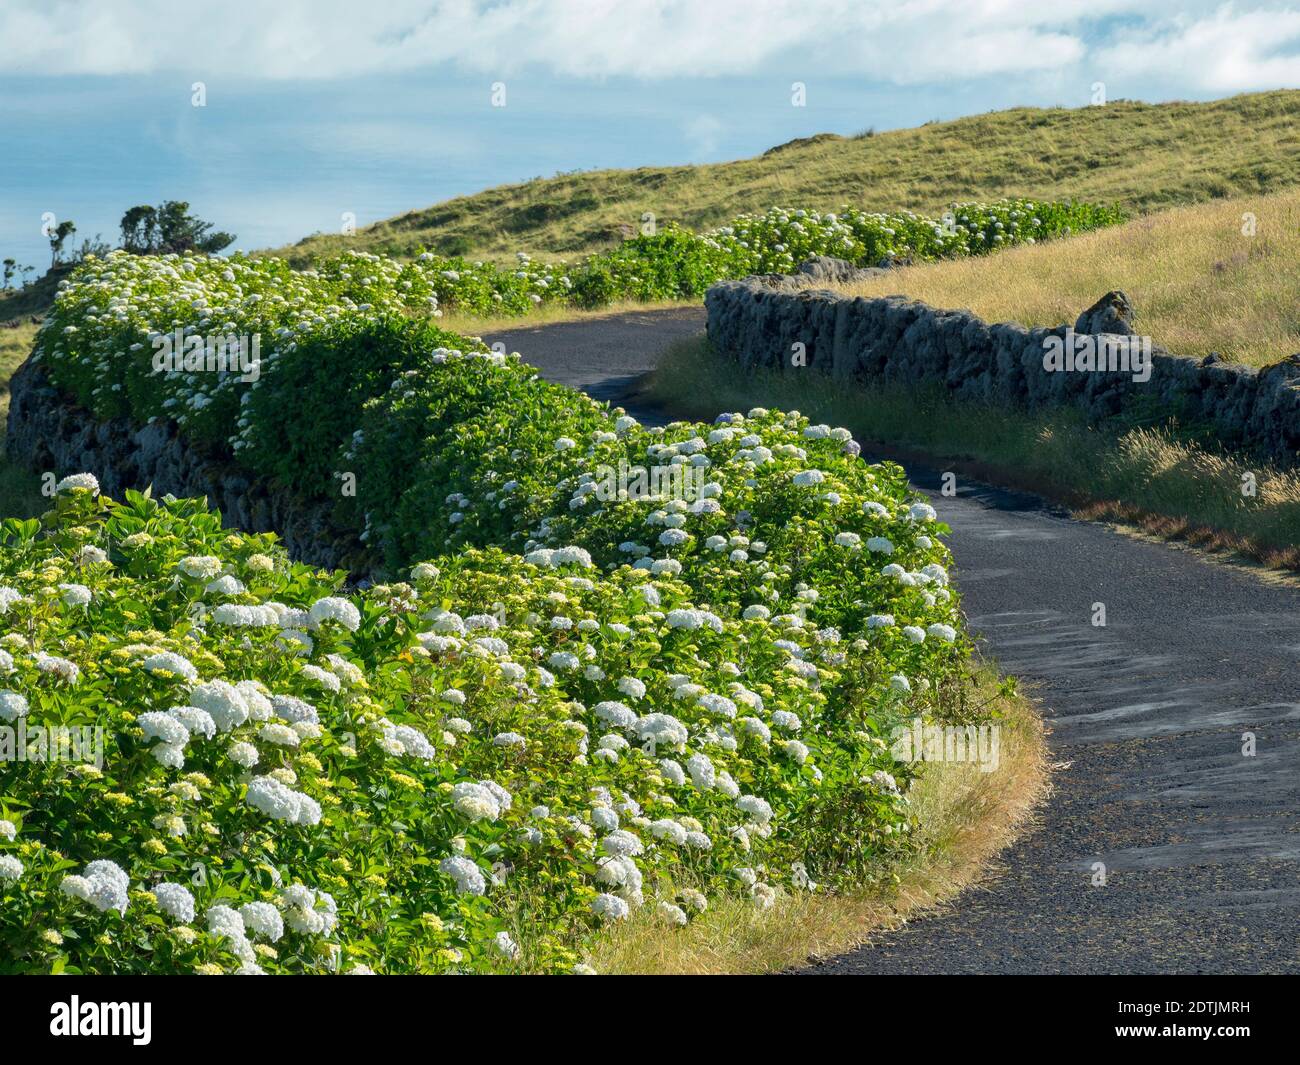 Hedge of Hortensia (Hydrangea macrophylla), an introduced plant, at roadside.  Pico Island, an island in the Azores (Ilhas dos Acores) in the Atlantic Stock Photo